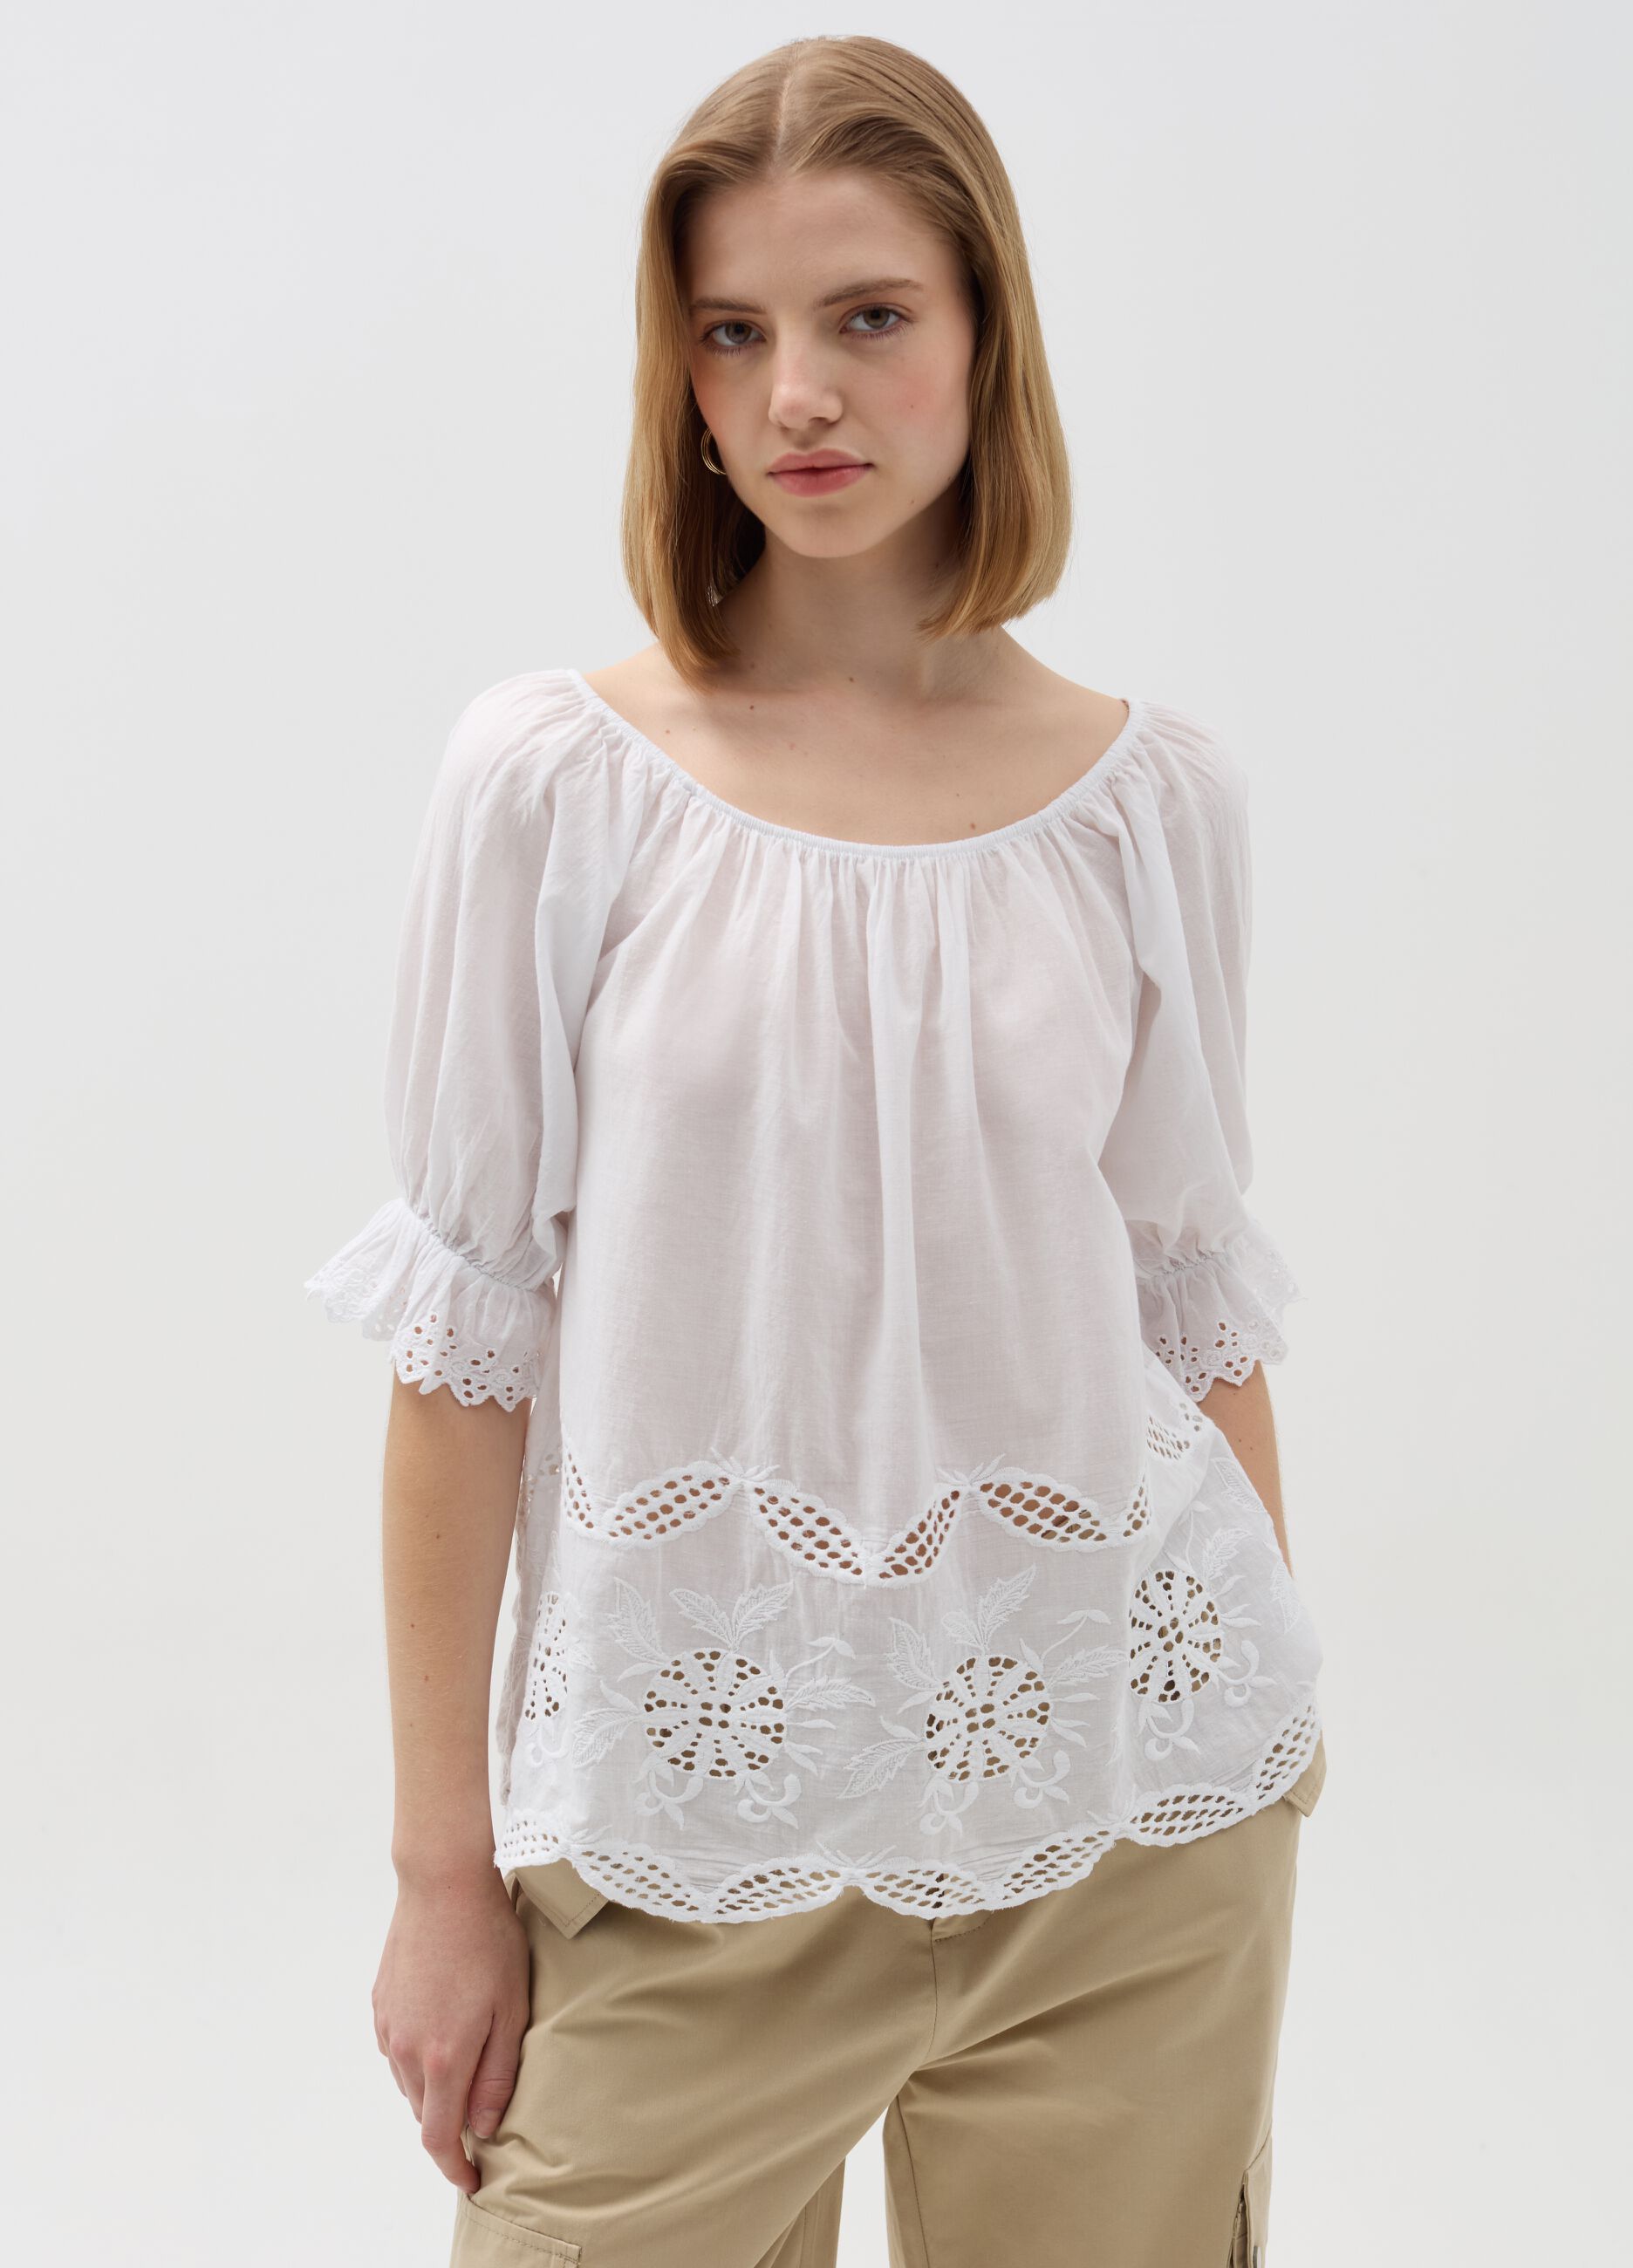 Blouse with embroidery and openwork details